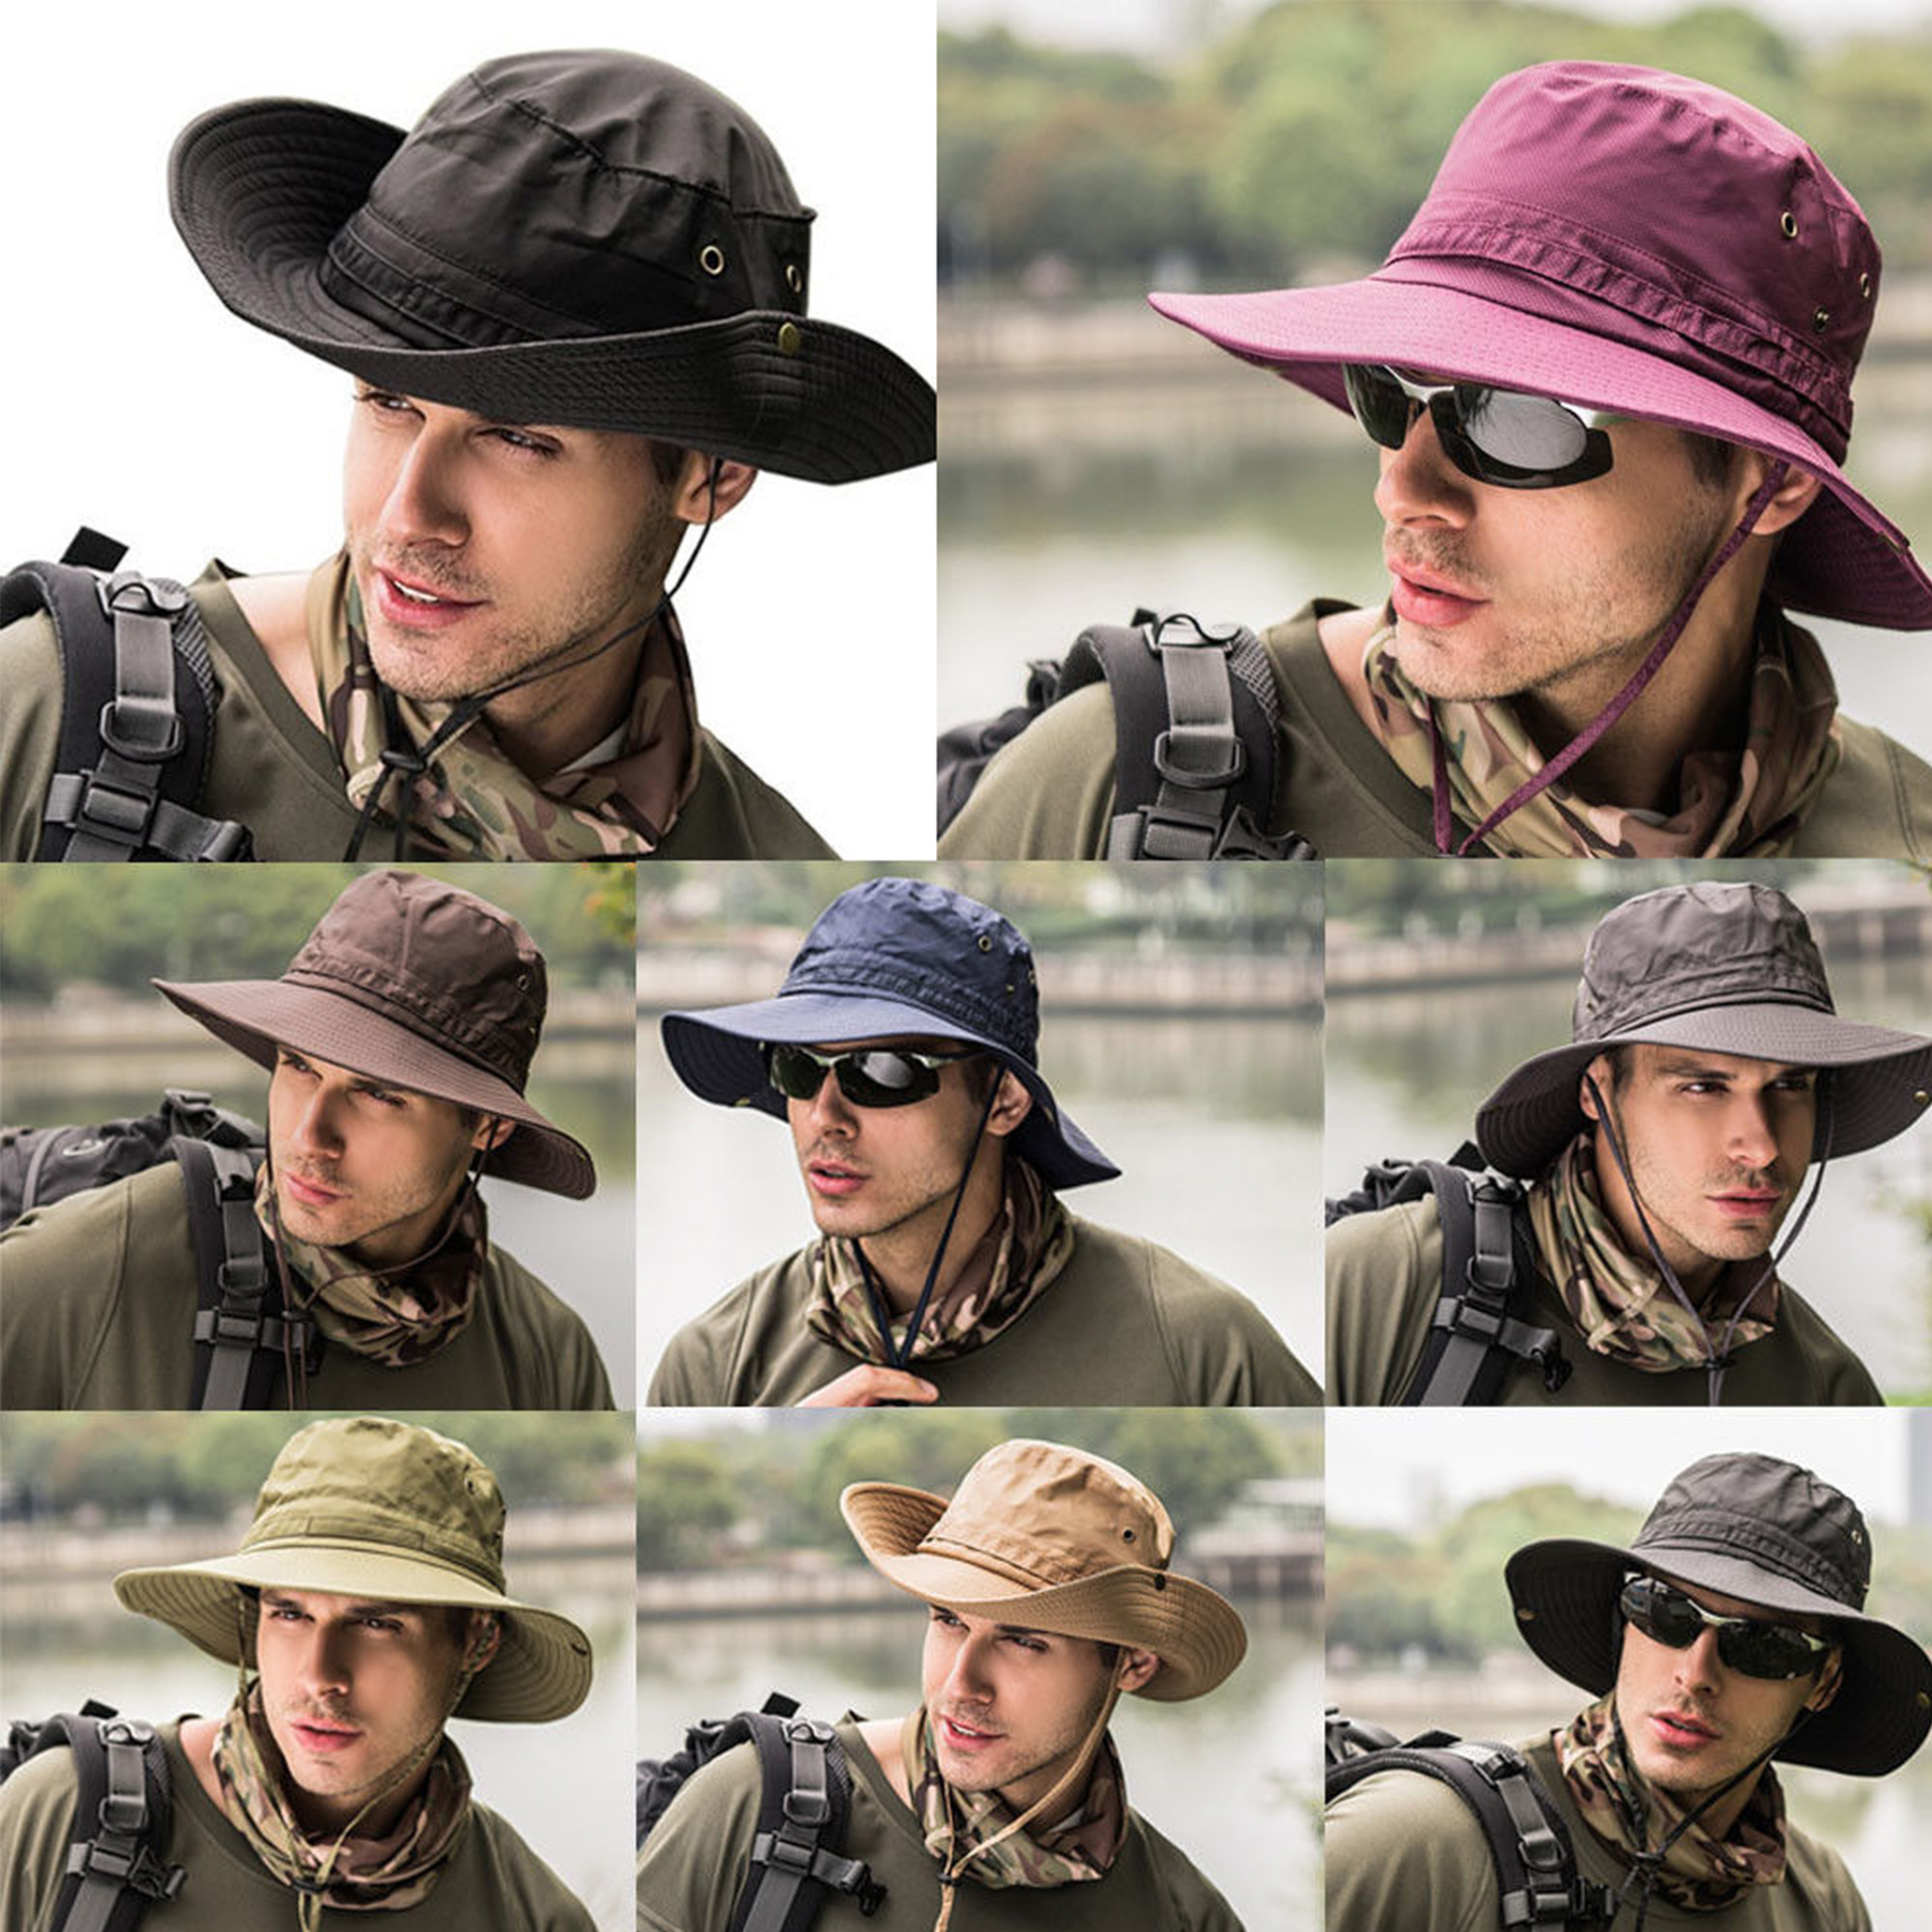 SUNSIOM Men's Military Bucket Hat Boonie Hunting Fishing Climbing Outdoor Wide Cap Brim - image 2 of 6